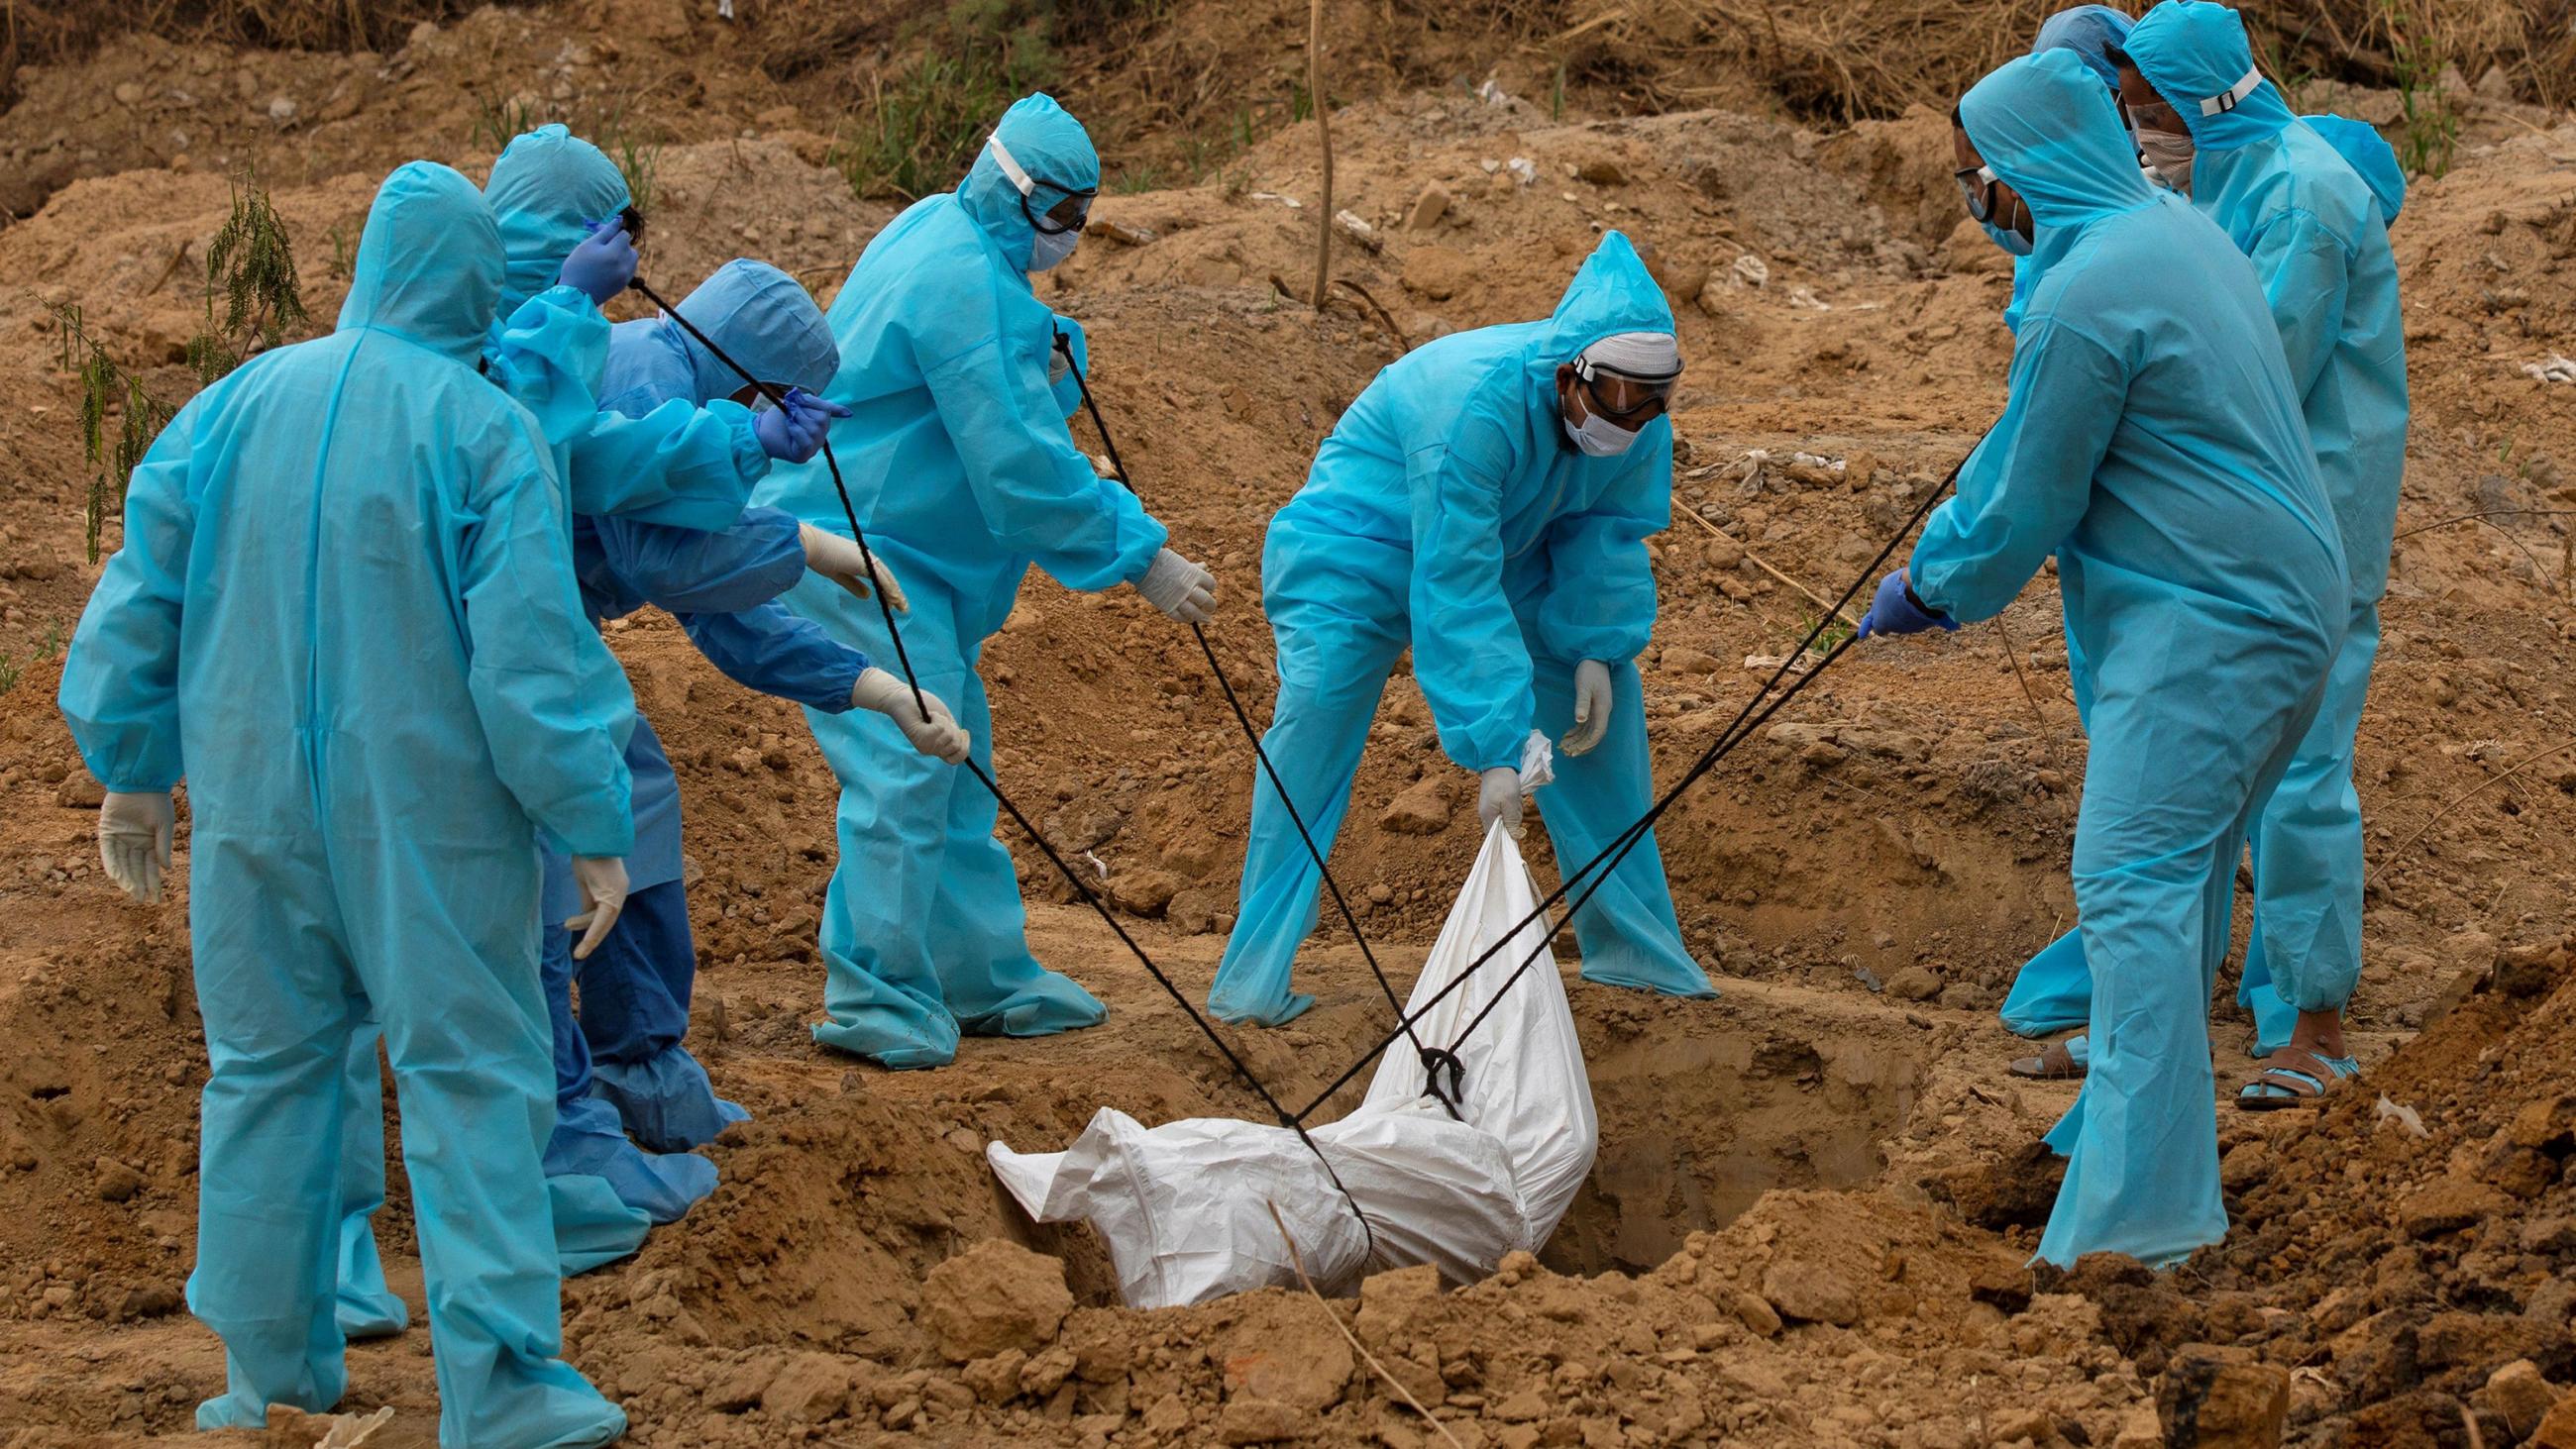 The photo shows a number of people in bright blue protective suits lowering a white sheet-wrapped body into the ground. 